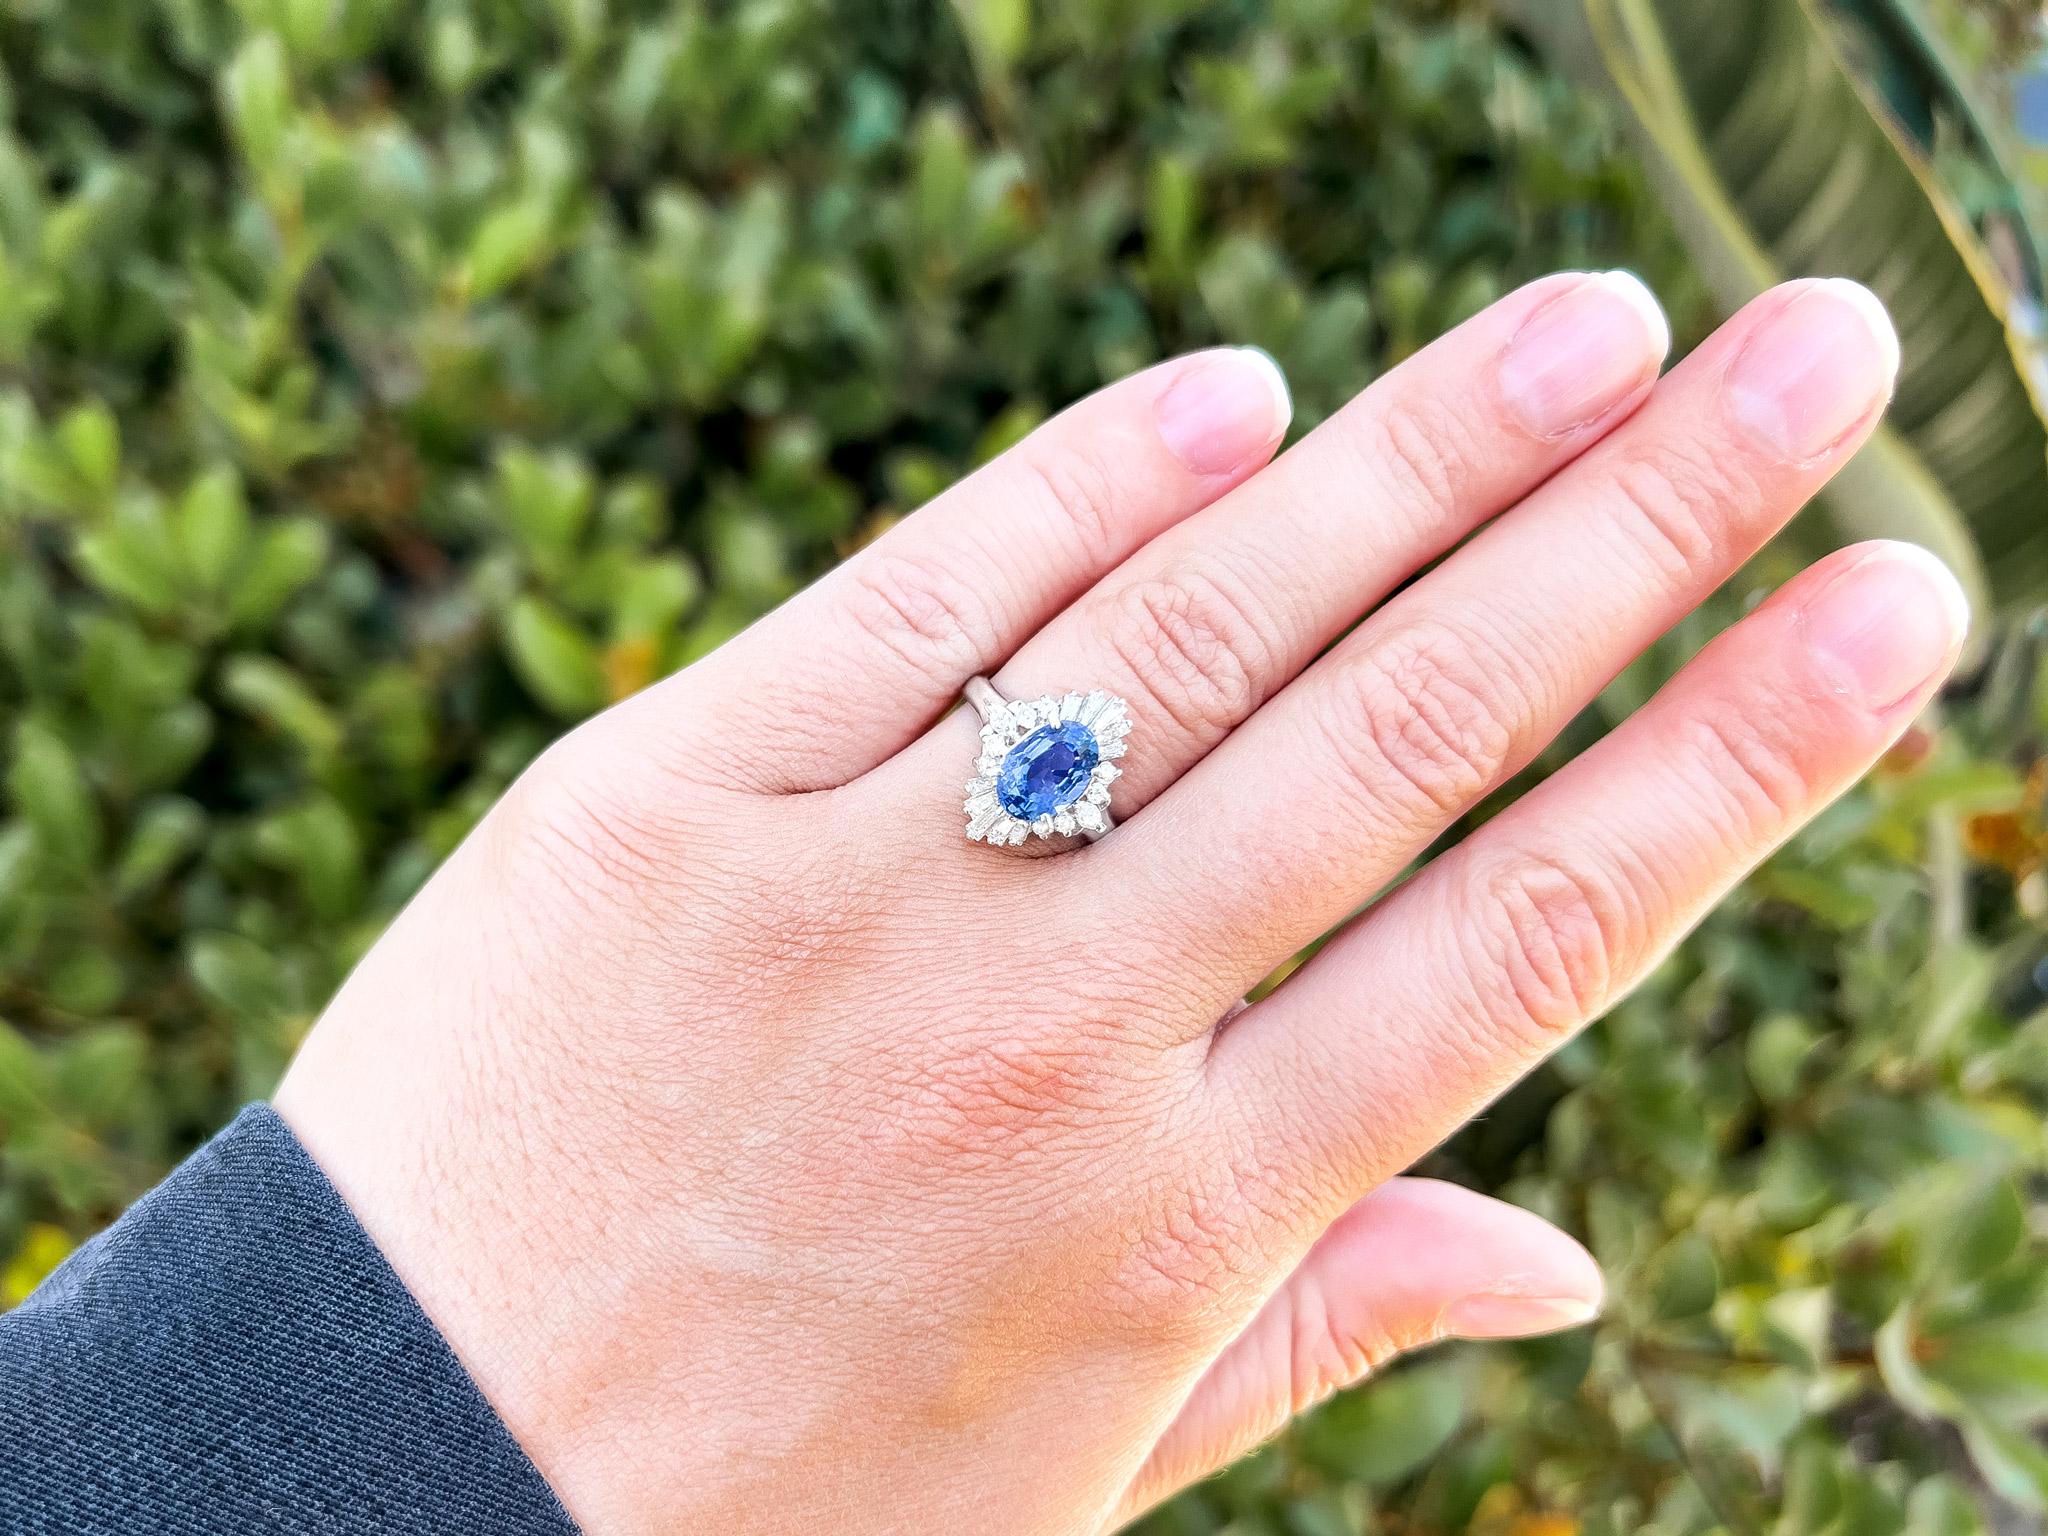 Ceylon Sapphire = 2.95 Carat
Diamonds = 0.80 Carats
( Color: F, Clarity: VS )
Metal: Platinum
Ring Size: 6.5* US
*It can be resized complimentary